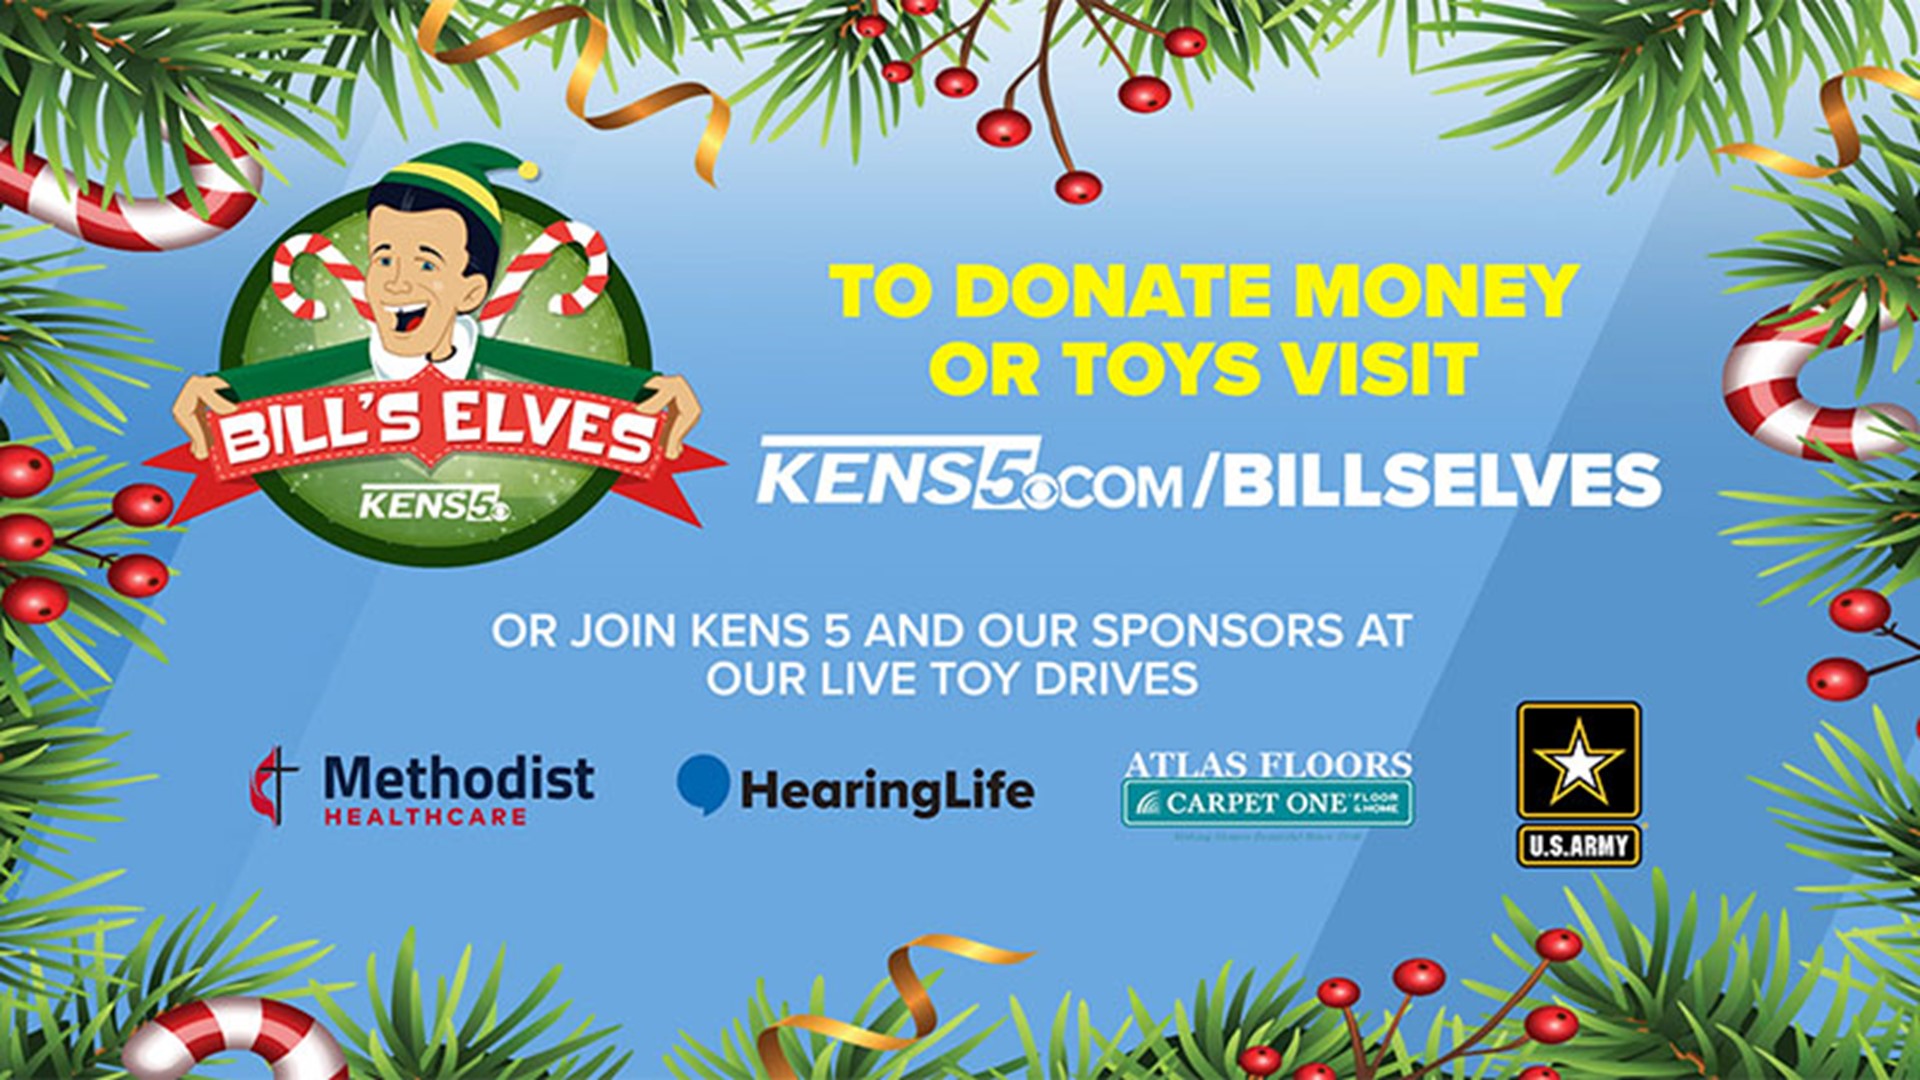 We need your help to make sure thousands of disadvantaged kids in the San Antonio area get a Christmas toy this year!